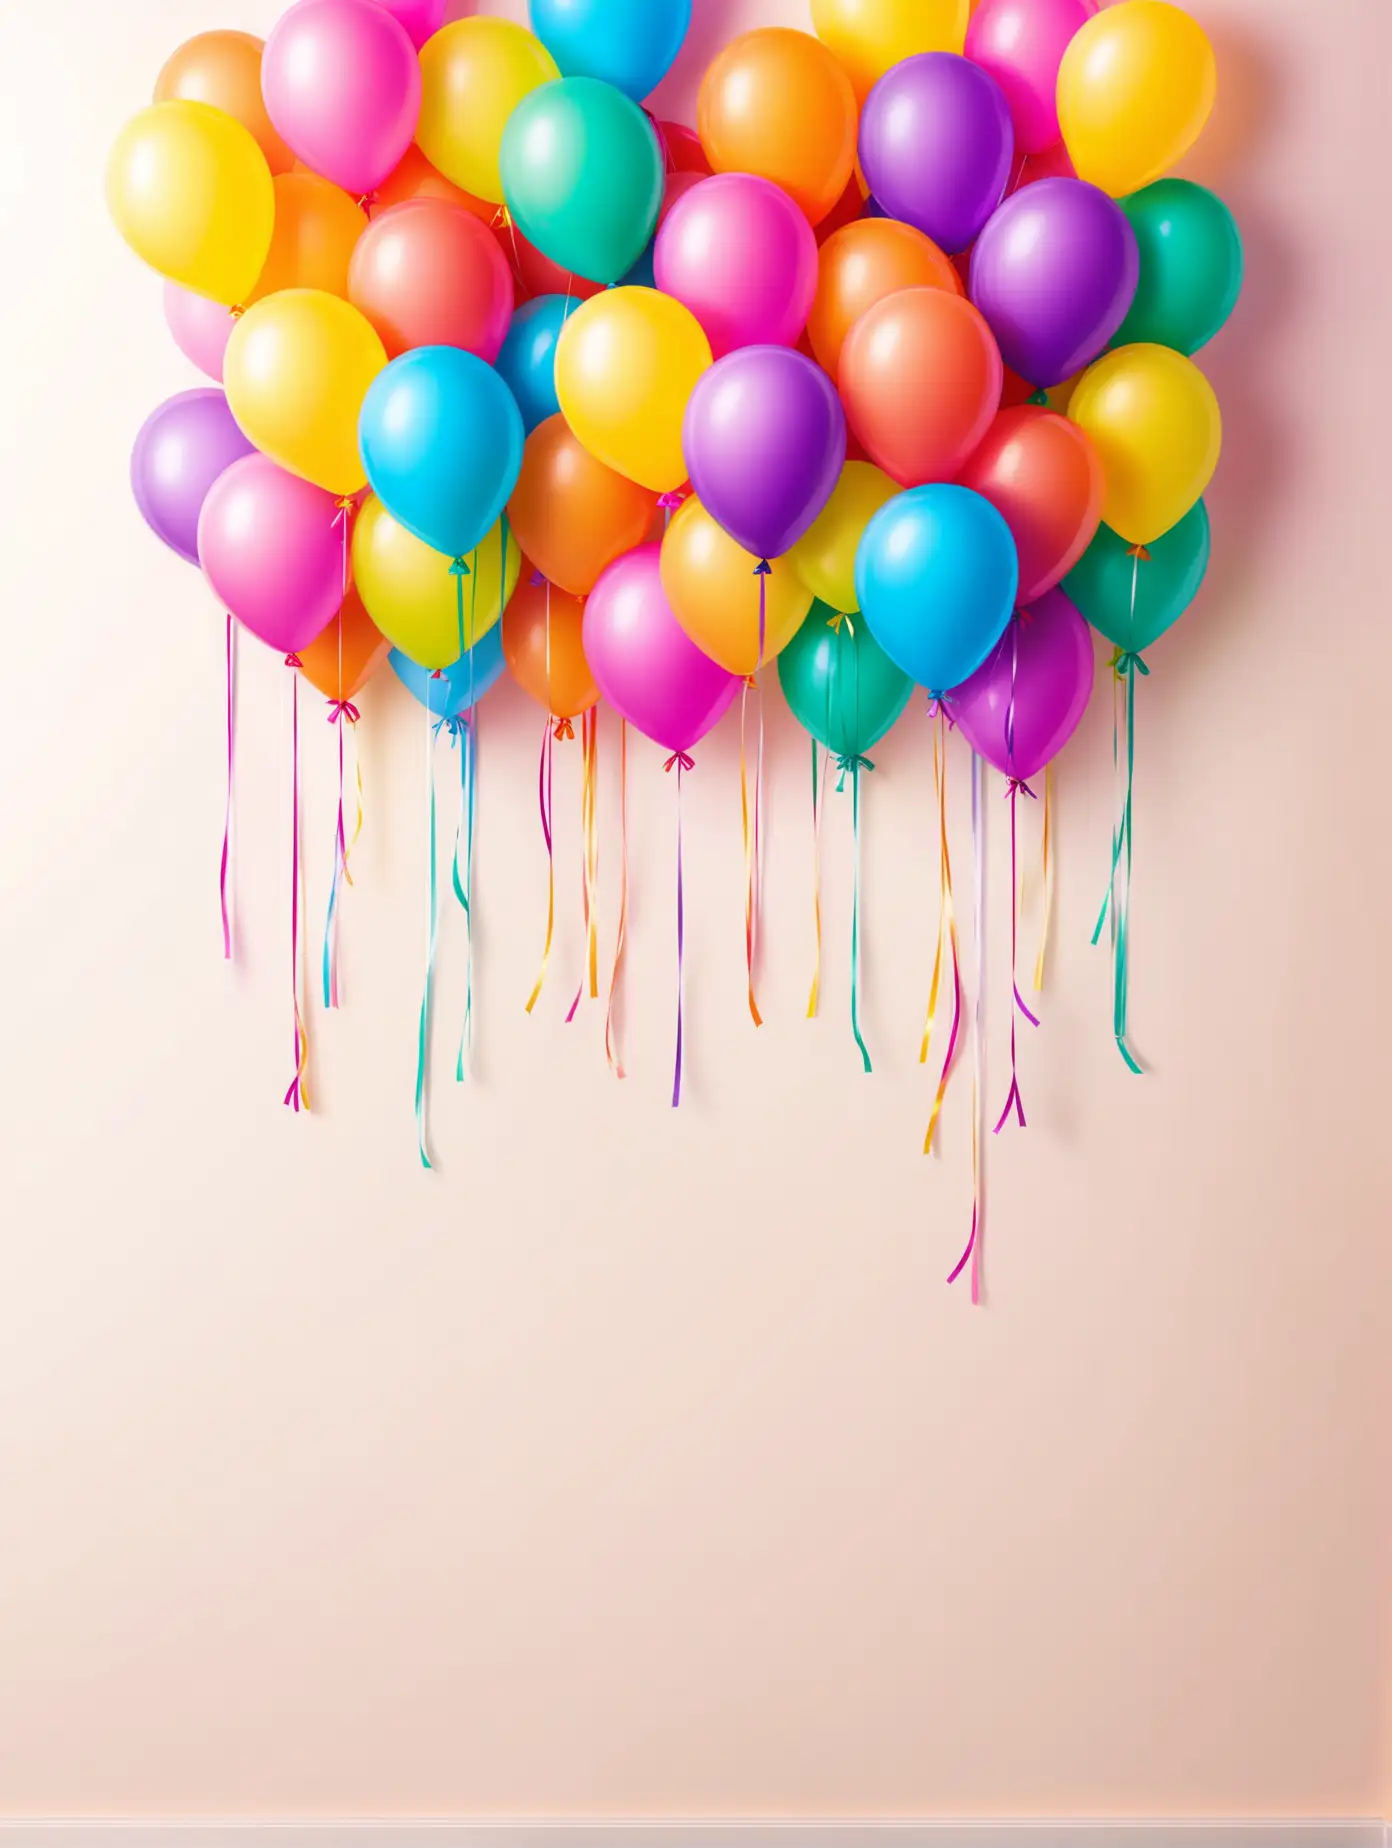 Atmosphere full of colorful balloons which are attached to the wall.